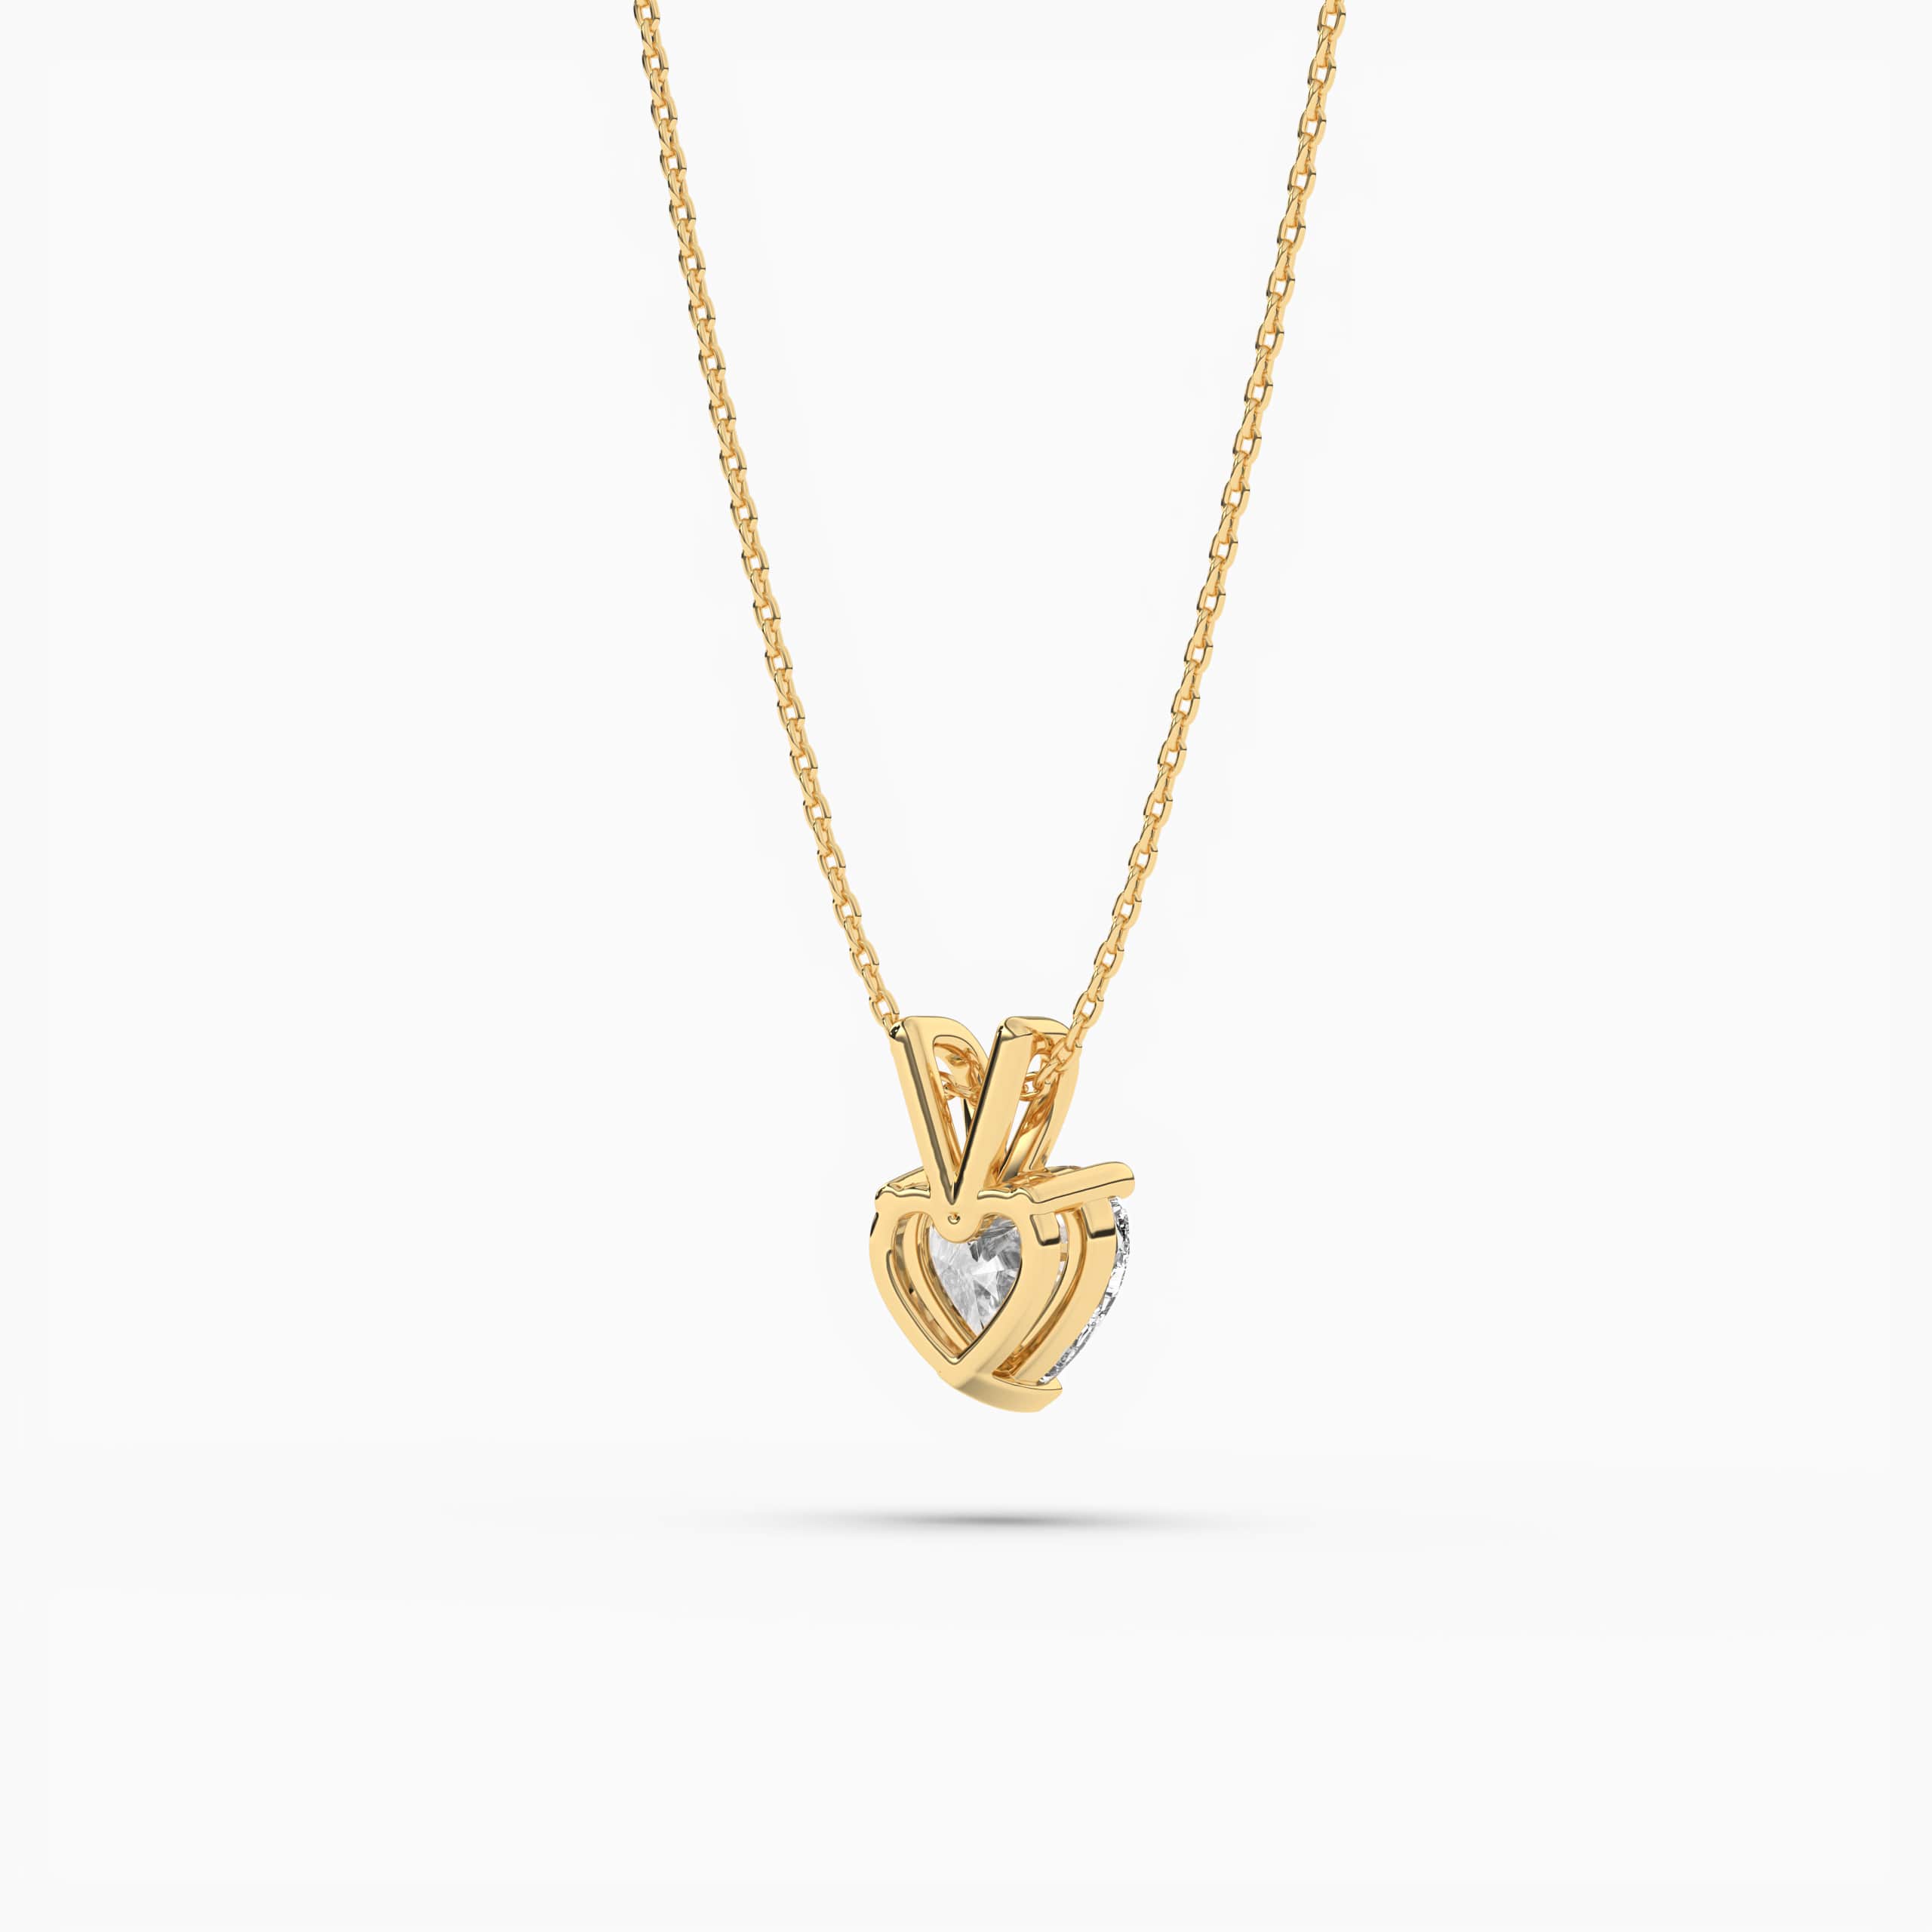 Gold Floating Heart Shaped Diamond Necklace